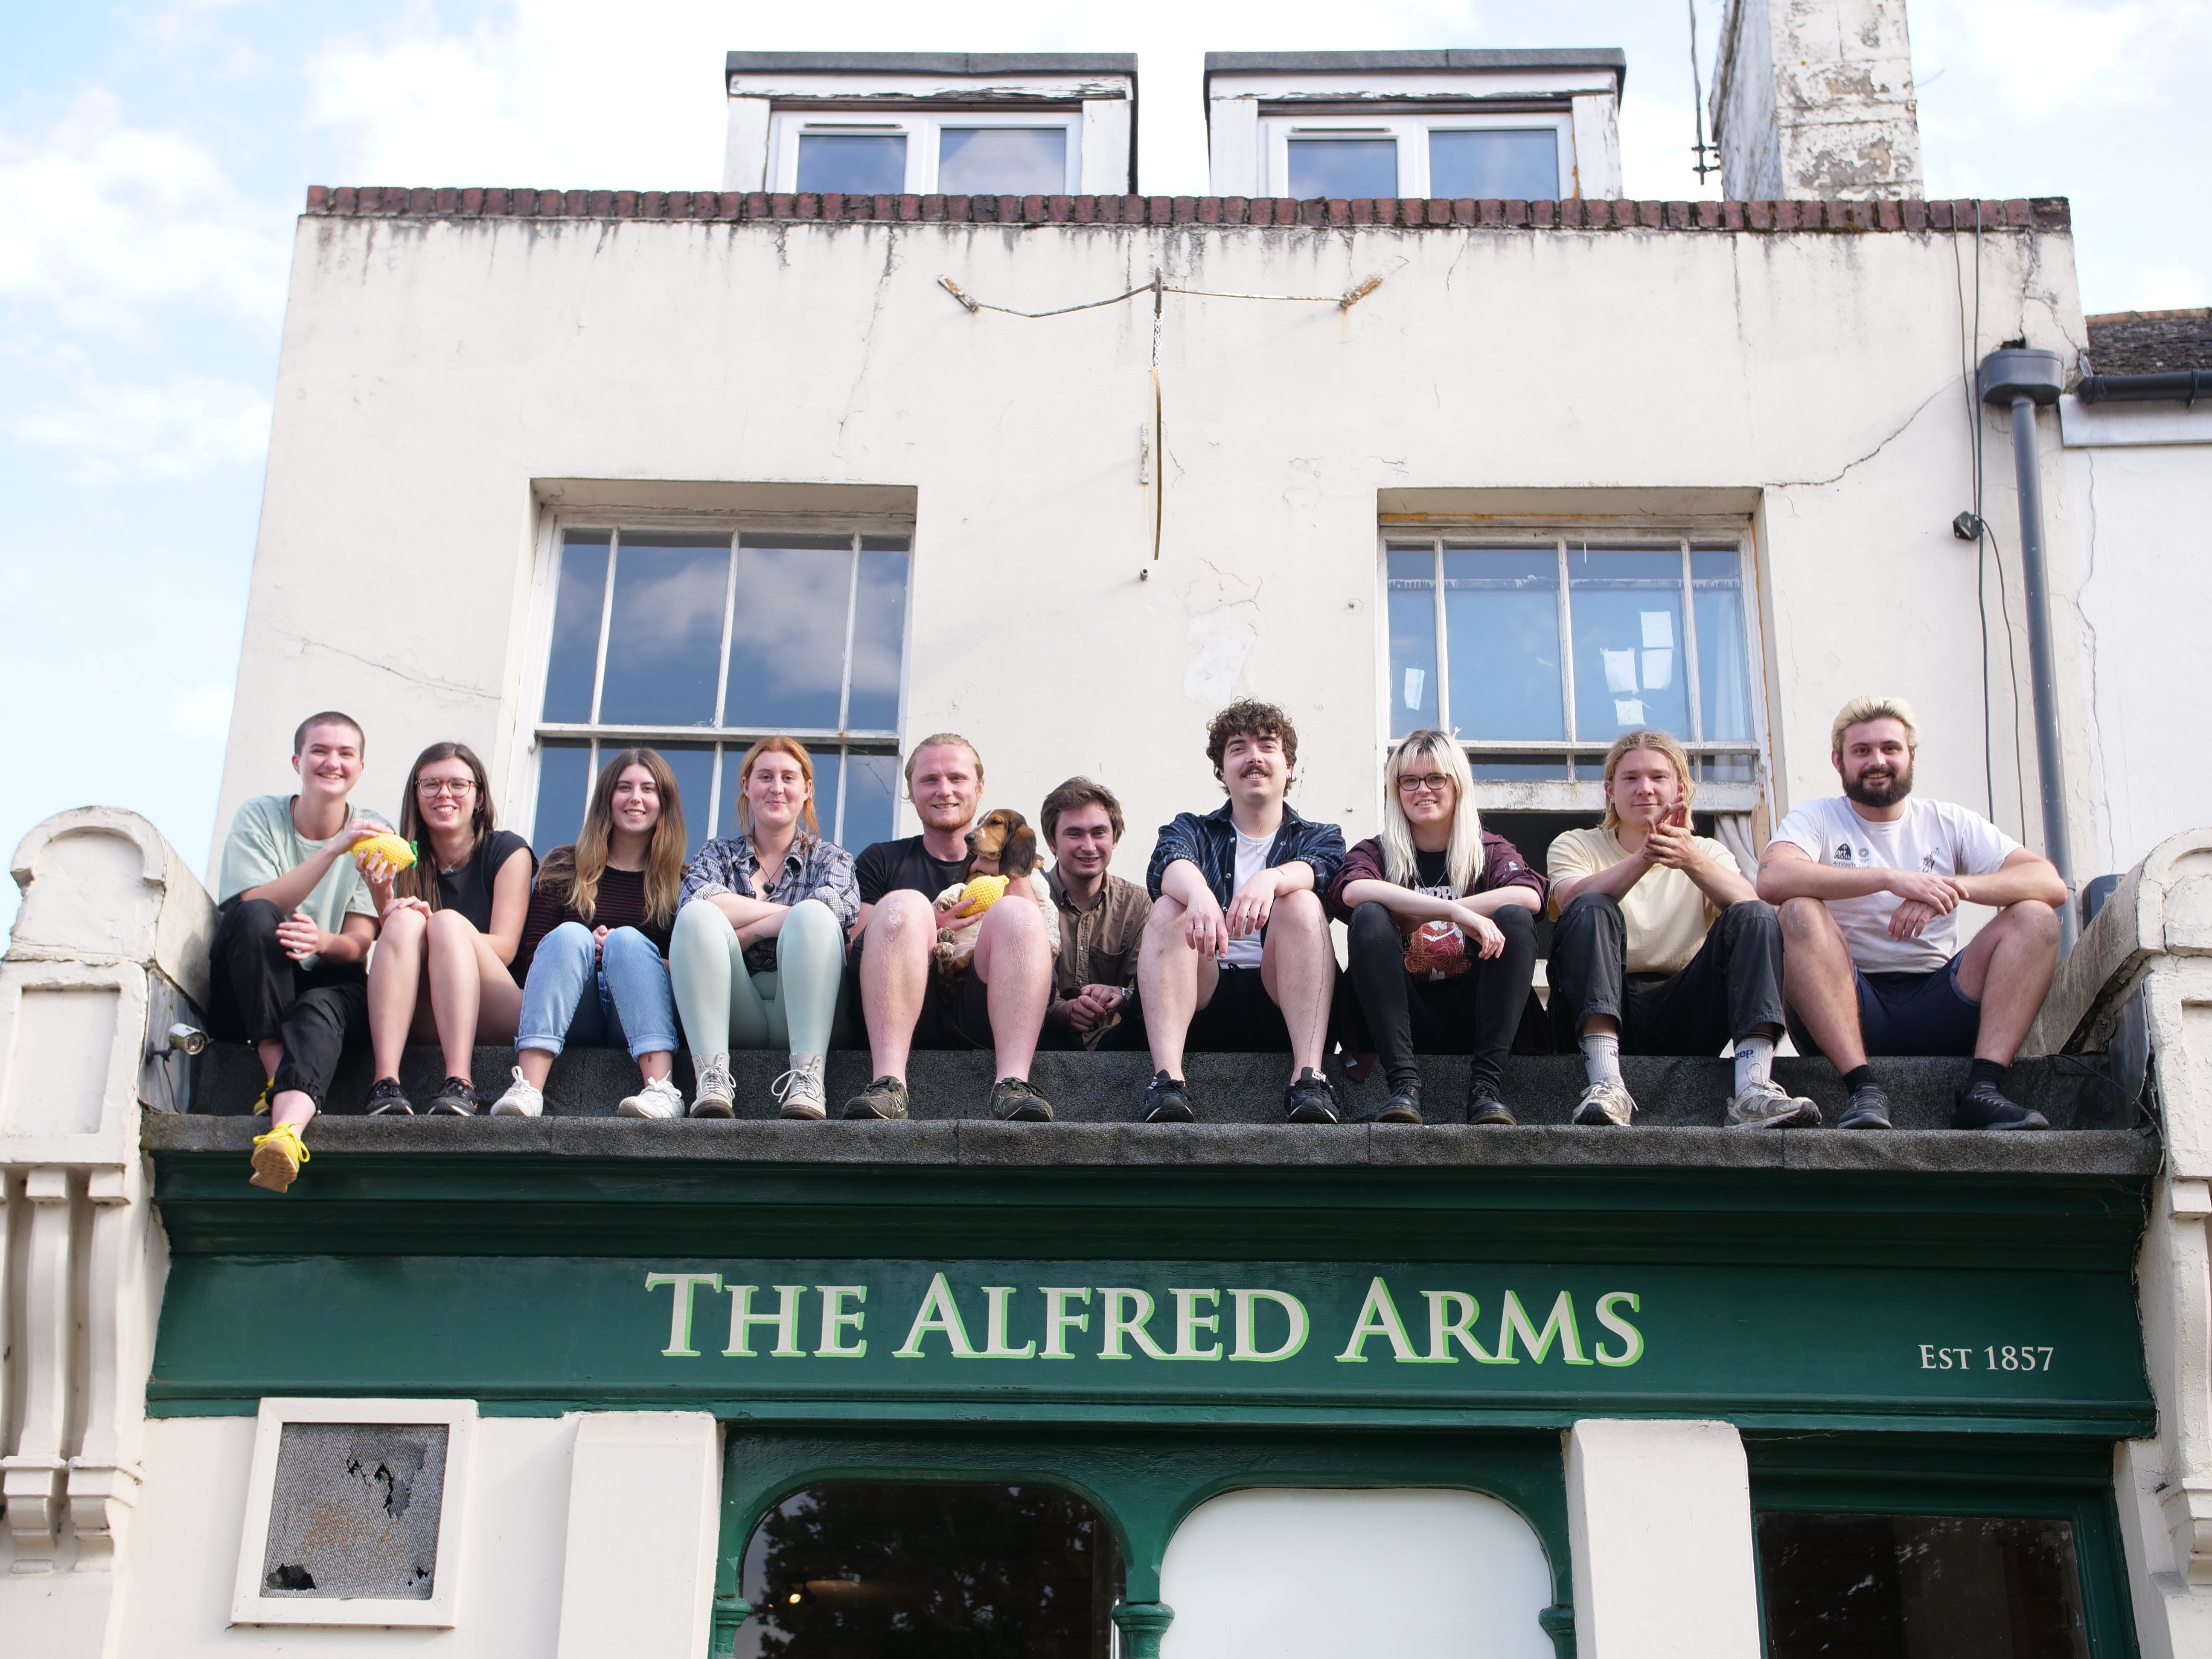 A group of people are sat in a line on a flat roof of a pub called The Alfred Arms, smiling and looking down for the camera